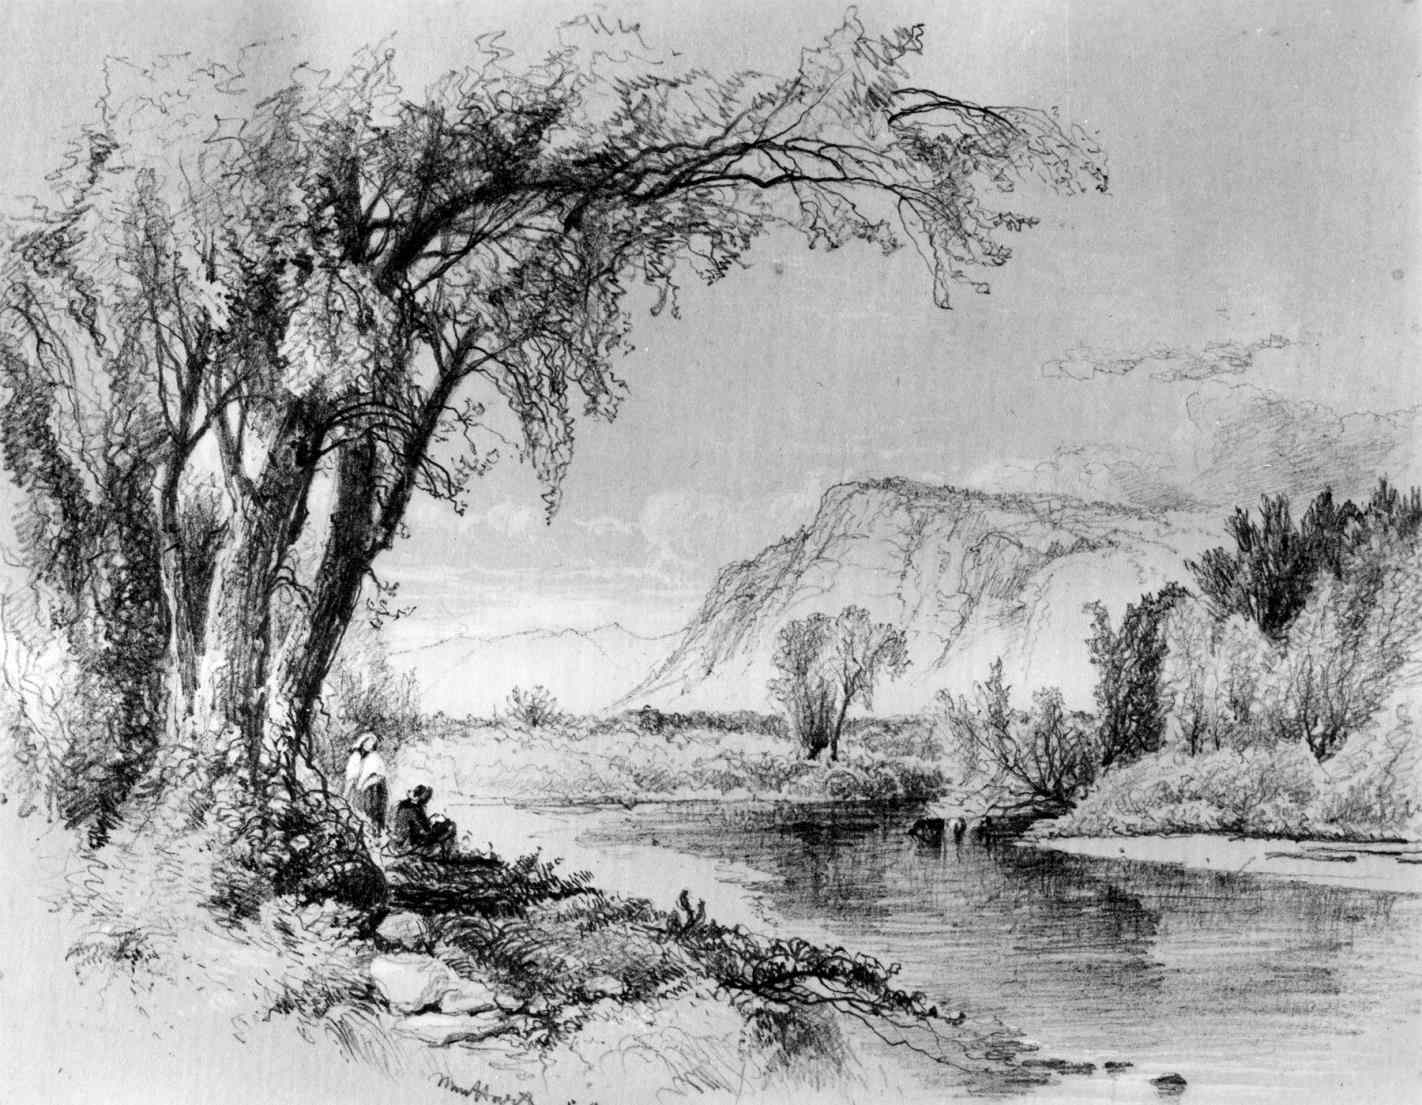 Pencil Sketch Scenery at Explore collection of